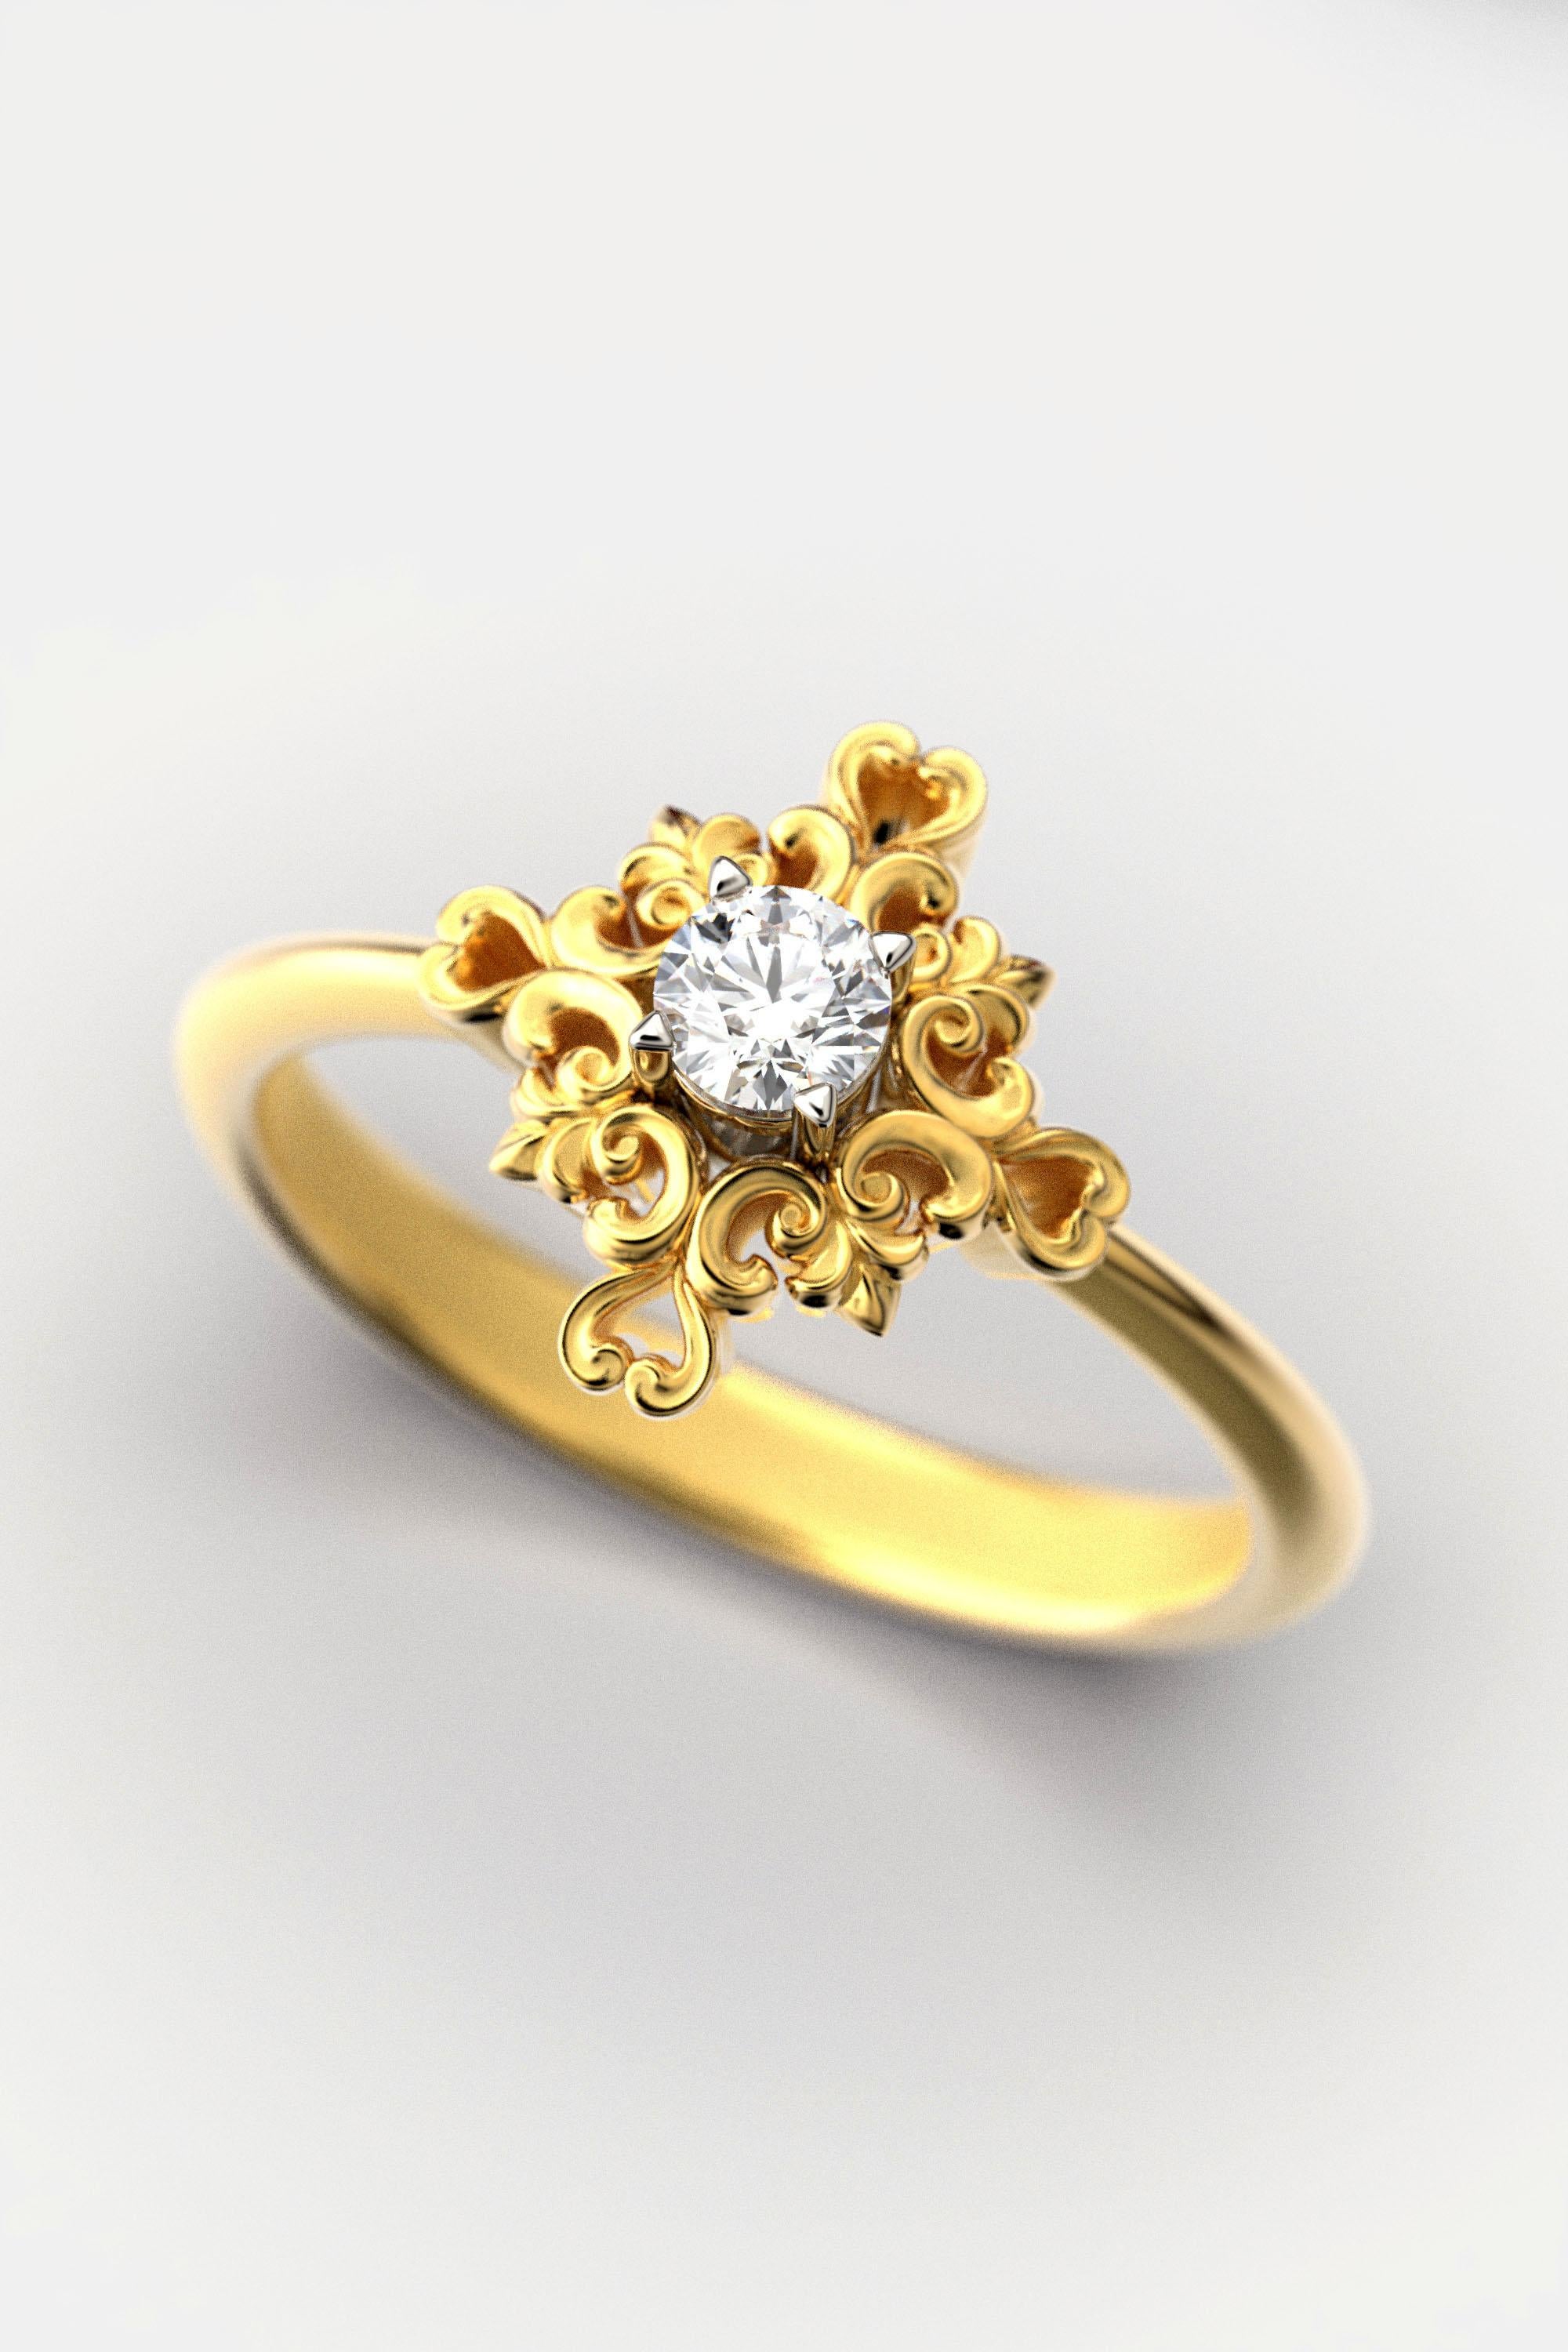 For Sale:  Italian Diamond Engagement Ring with Baroque Setting 18k gold 9